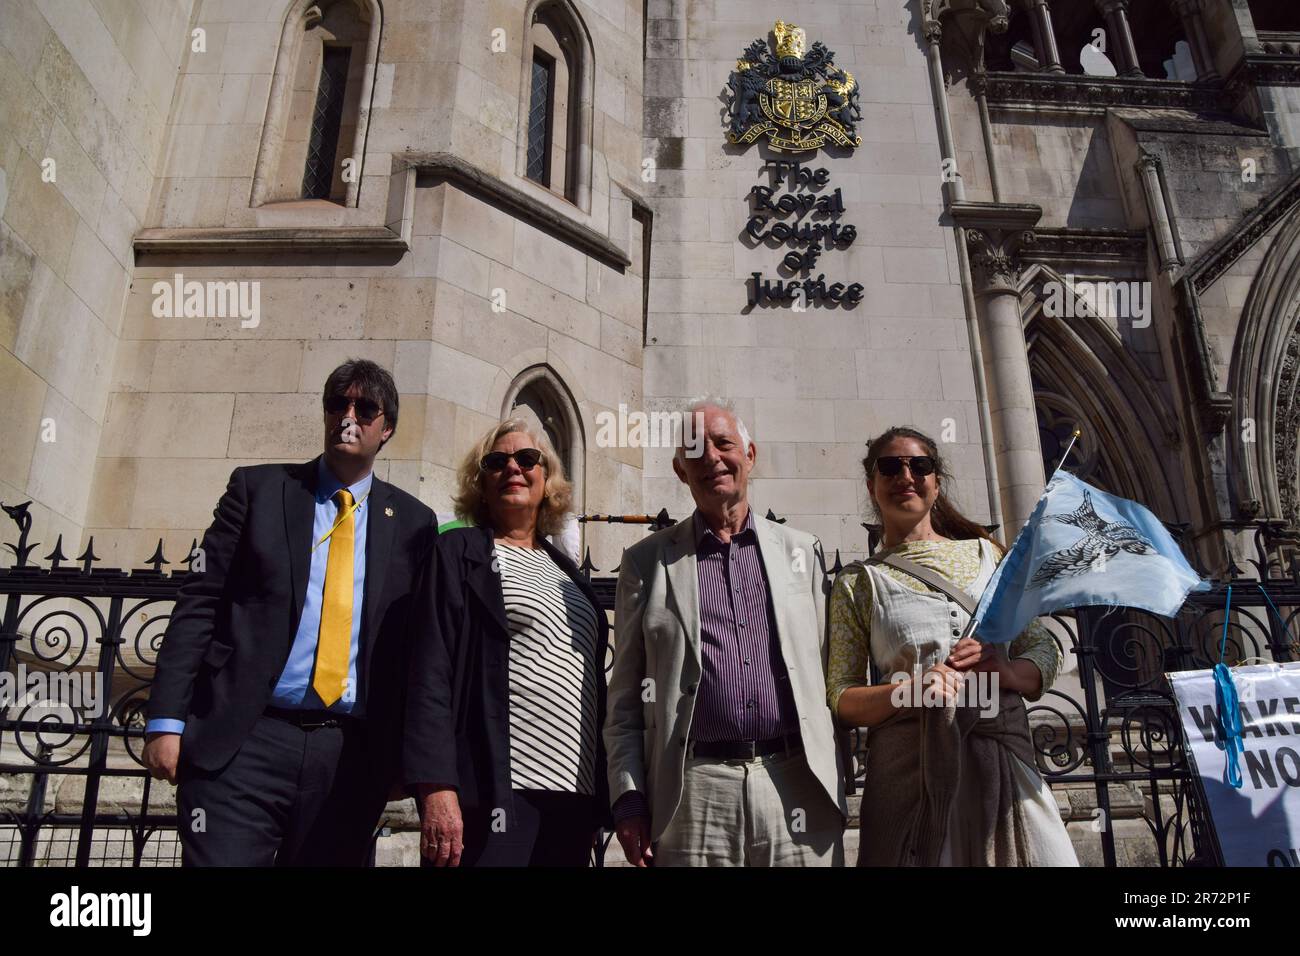 London, UK. 8th June 2023. Members of Waverley Borough Council stand outside the Royal Courts of Justice ahead of the judicial review of the planning permission for UK Oil & Gas to explore for fossil fuels near the village of Dunsfold. Stock Photo